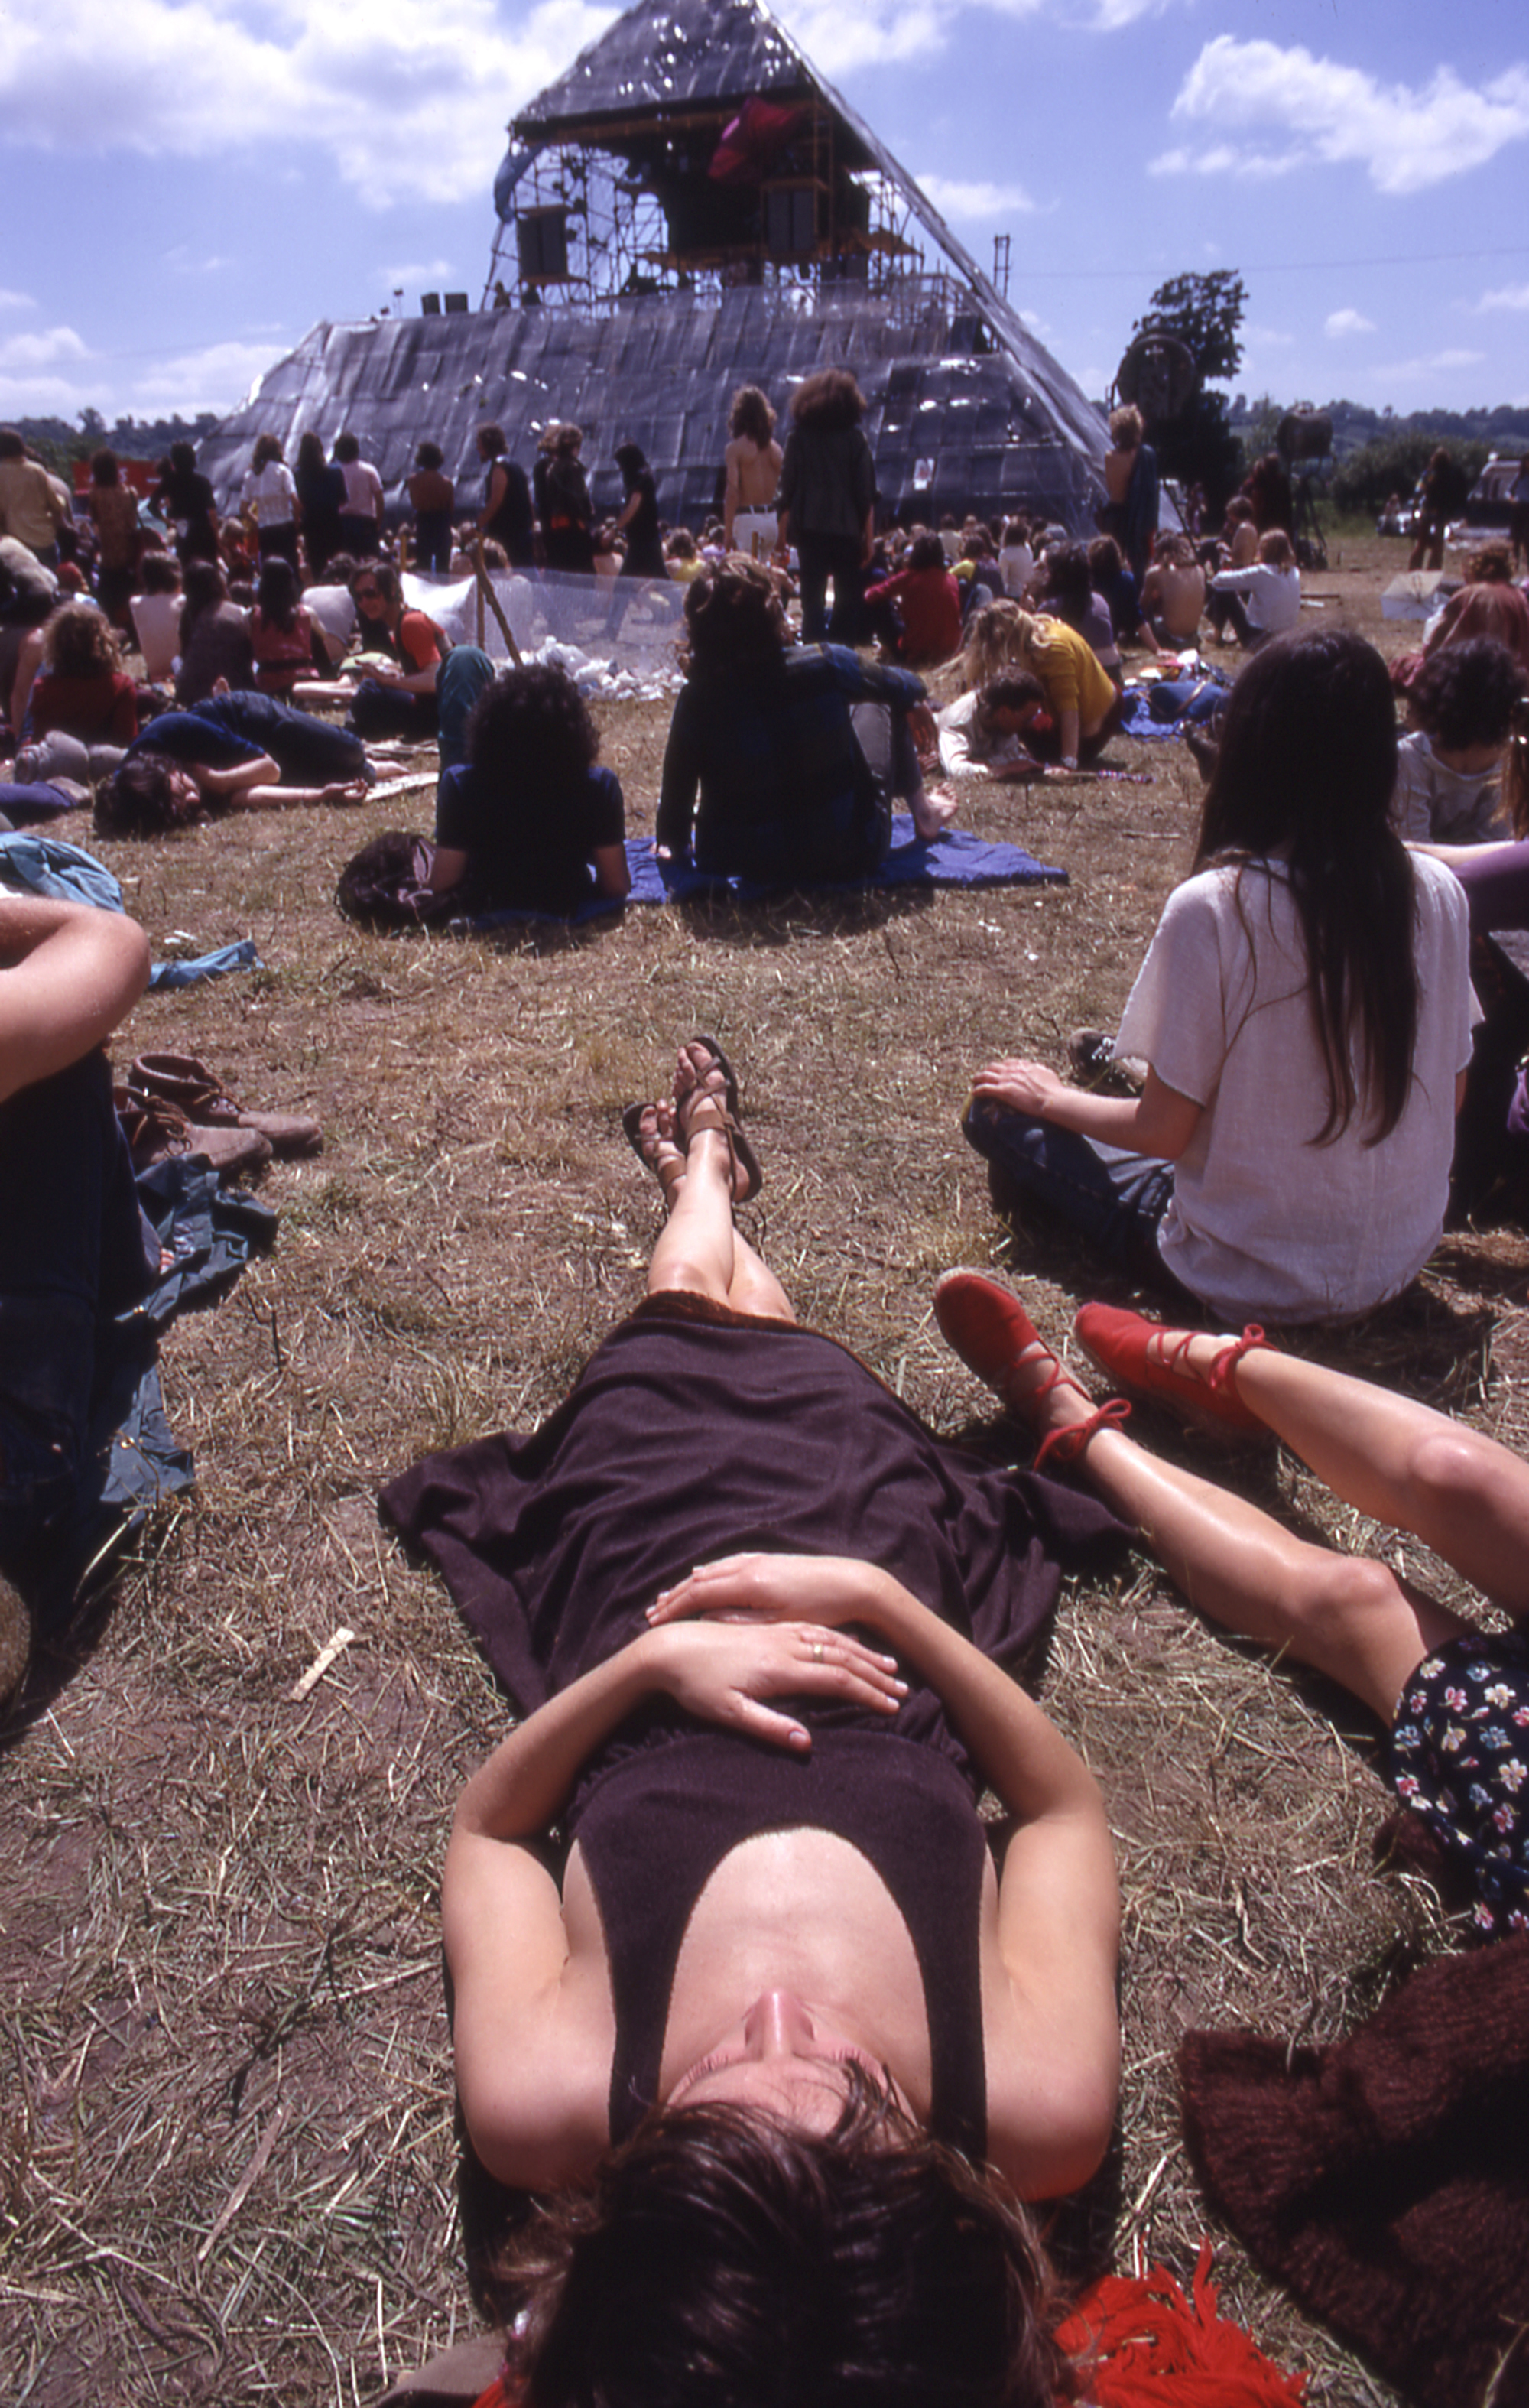 Julie Christie lying down in front of the pyramid stage at glastonbury 1971